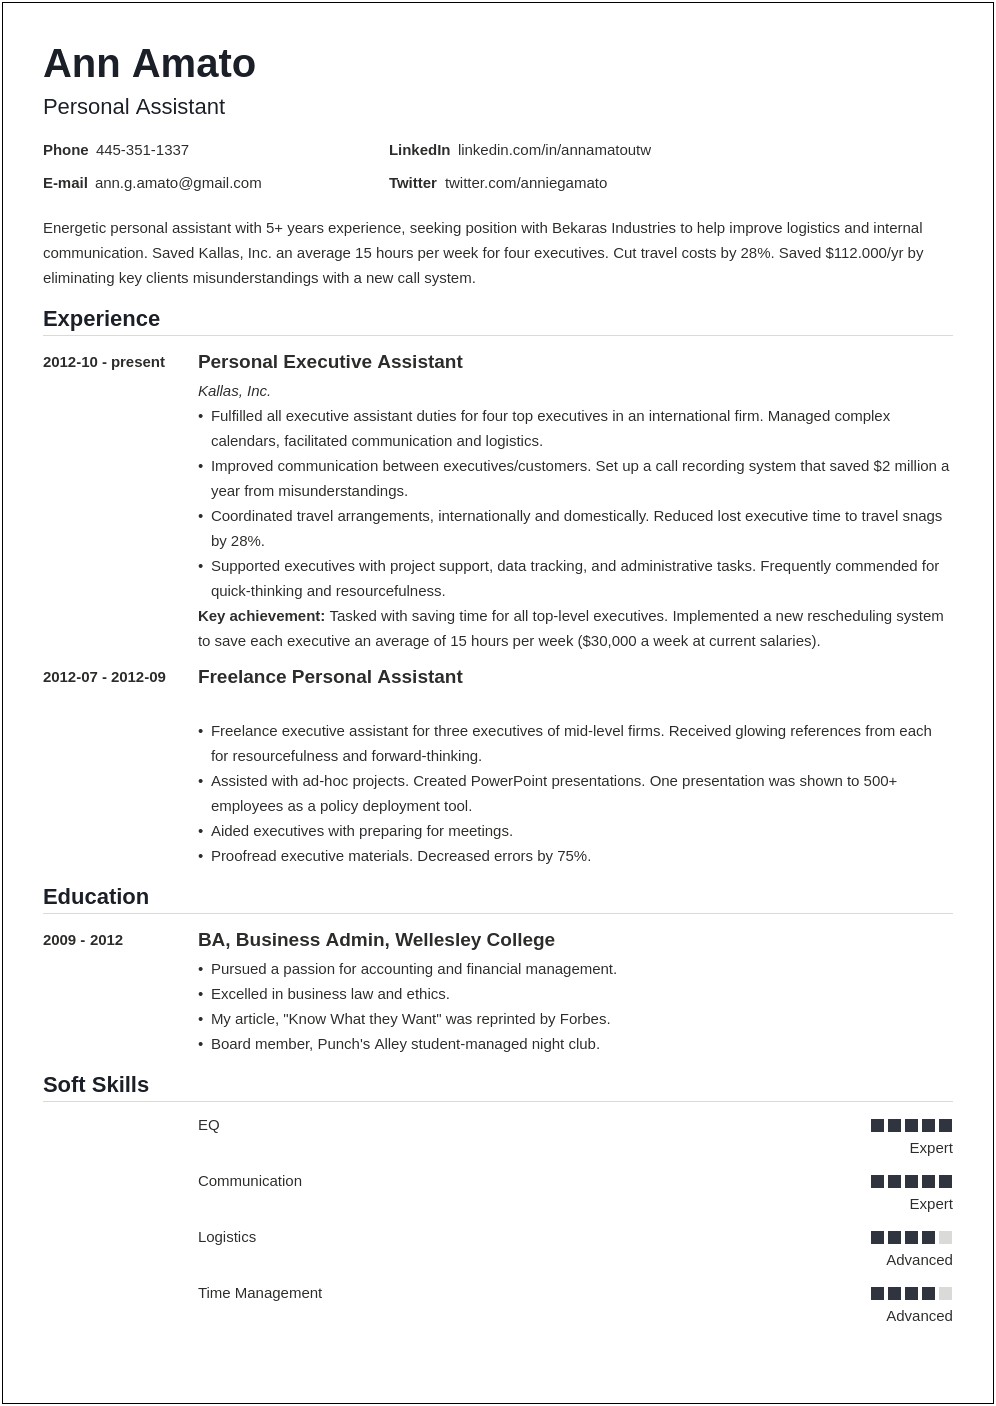 5 Years Experience Resume Format Pdf